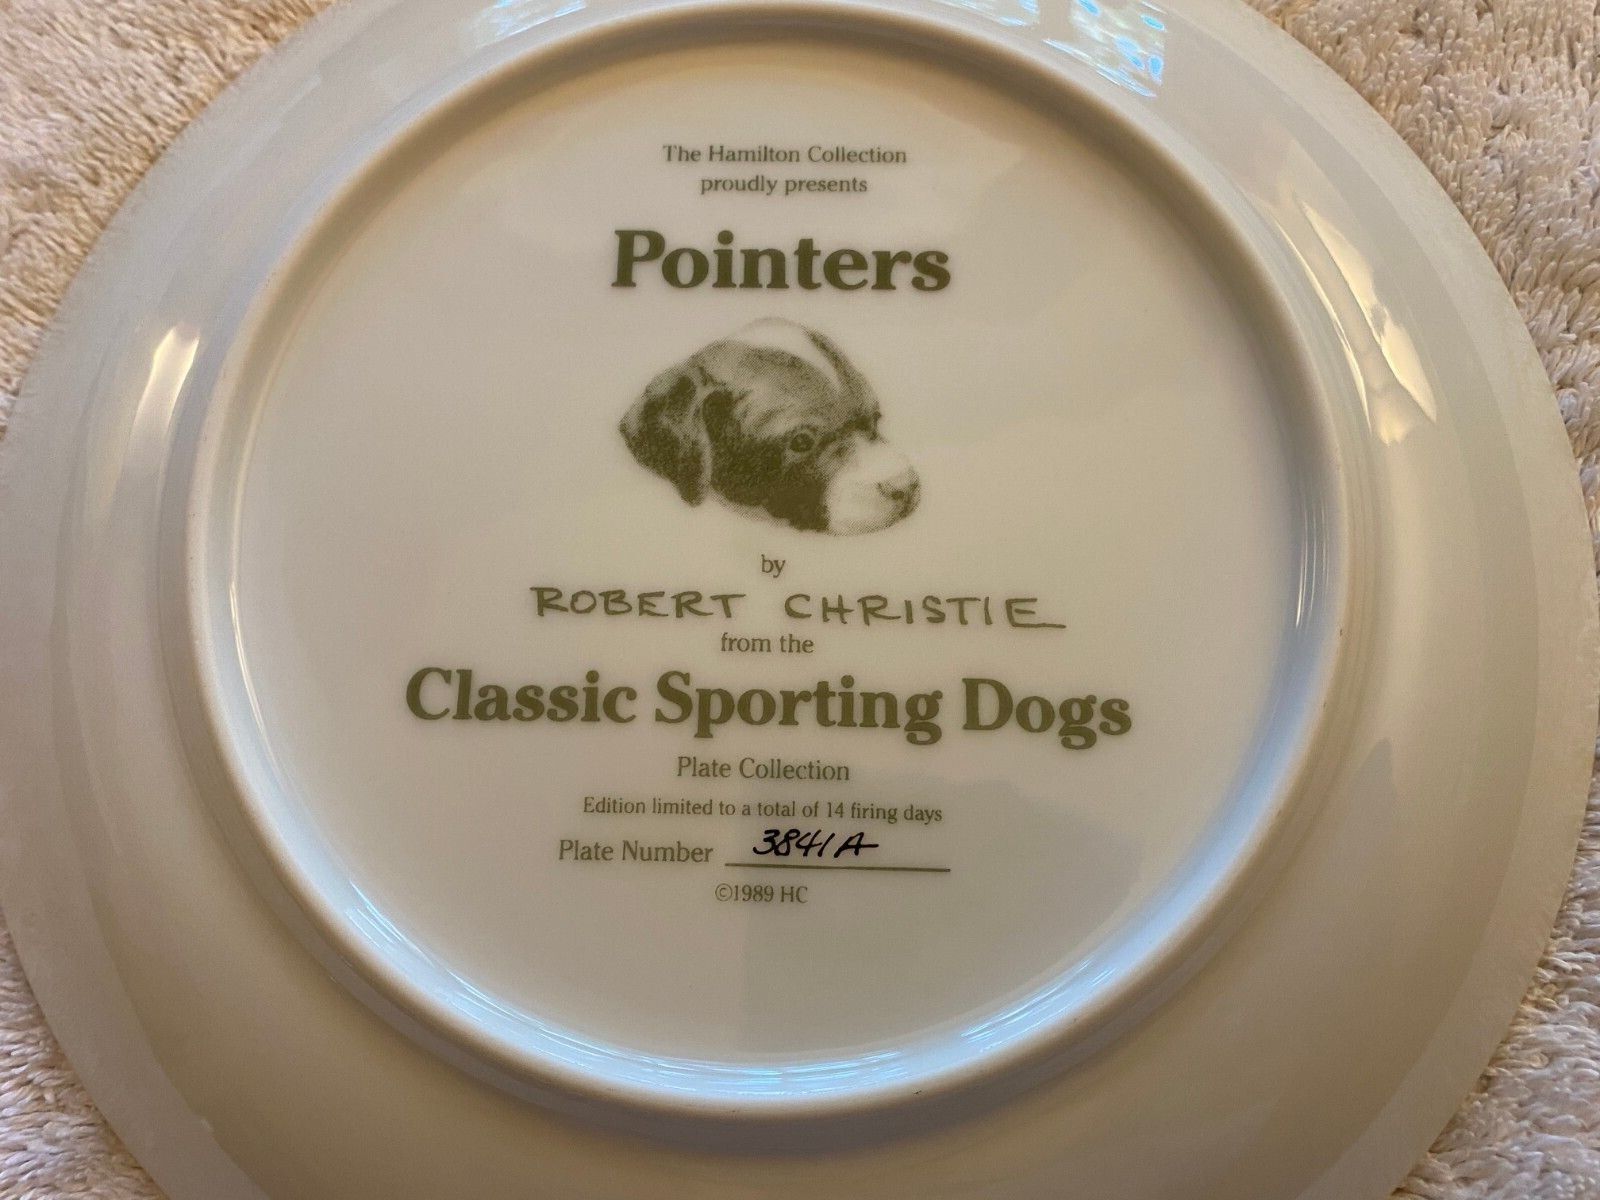 Classic Sporting Dogs- Robert Christie- Hamilton Collection 3841A NOS Pointers Без бренда - фотография #6